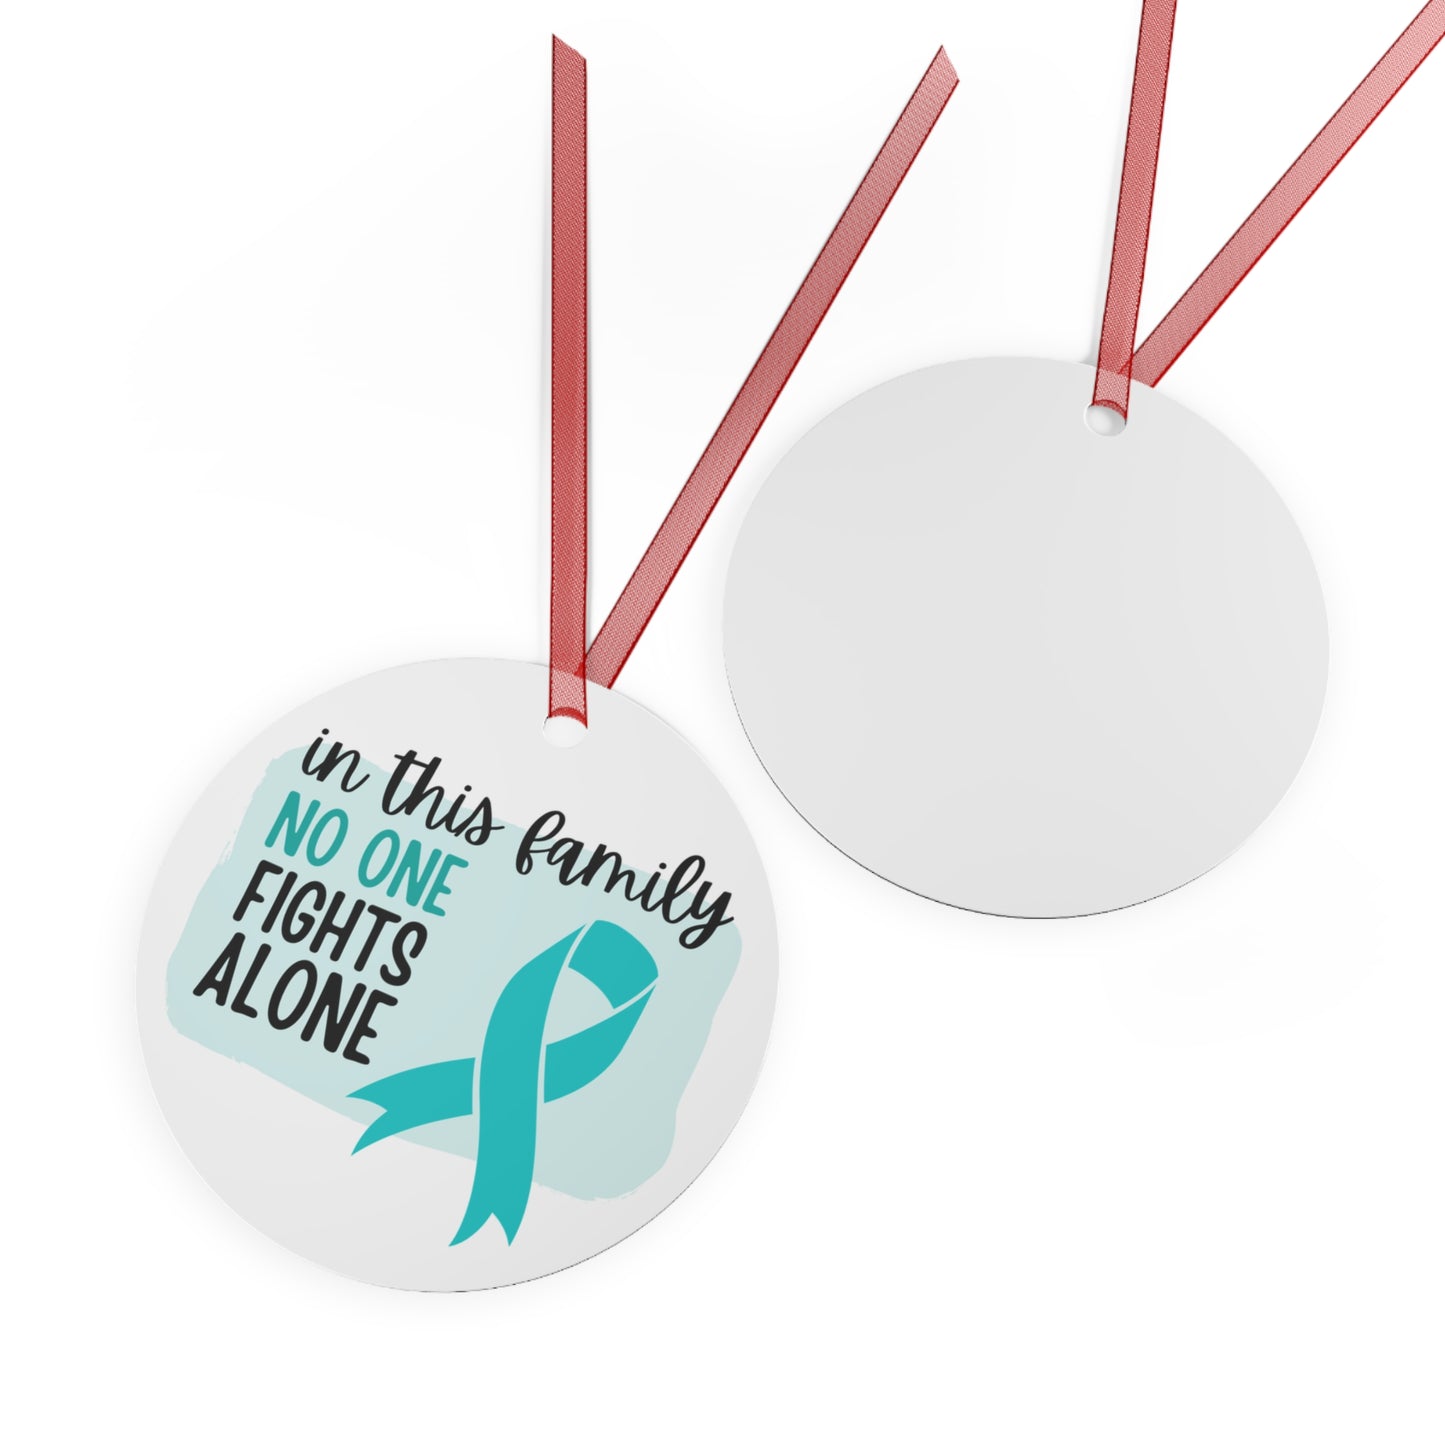 Cervical Cancer Ornament- Teal Ribbon Awareness -In this family no one fights alone - Support for friend - Christmas Decor